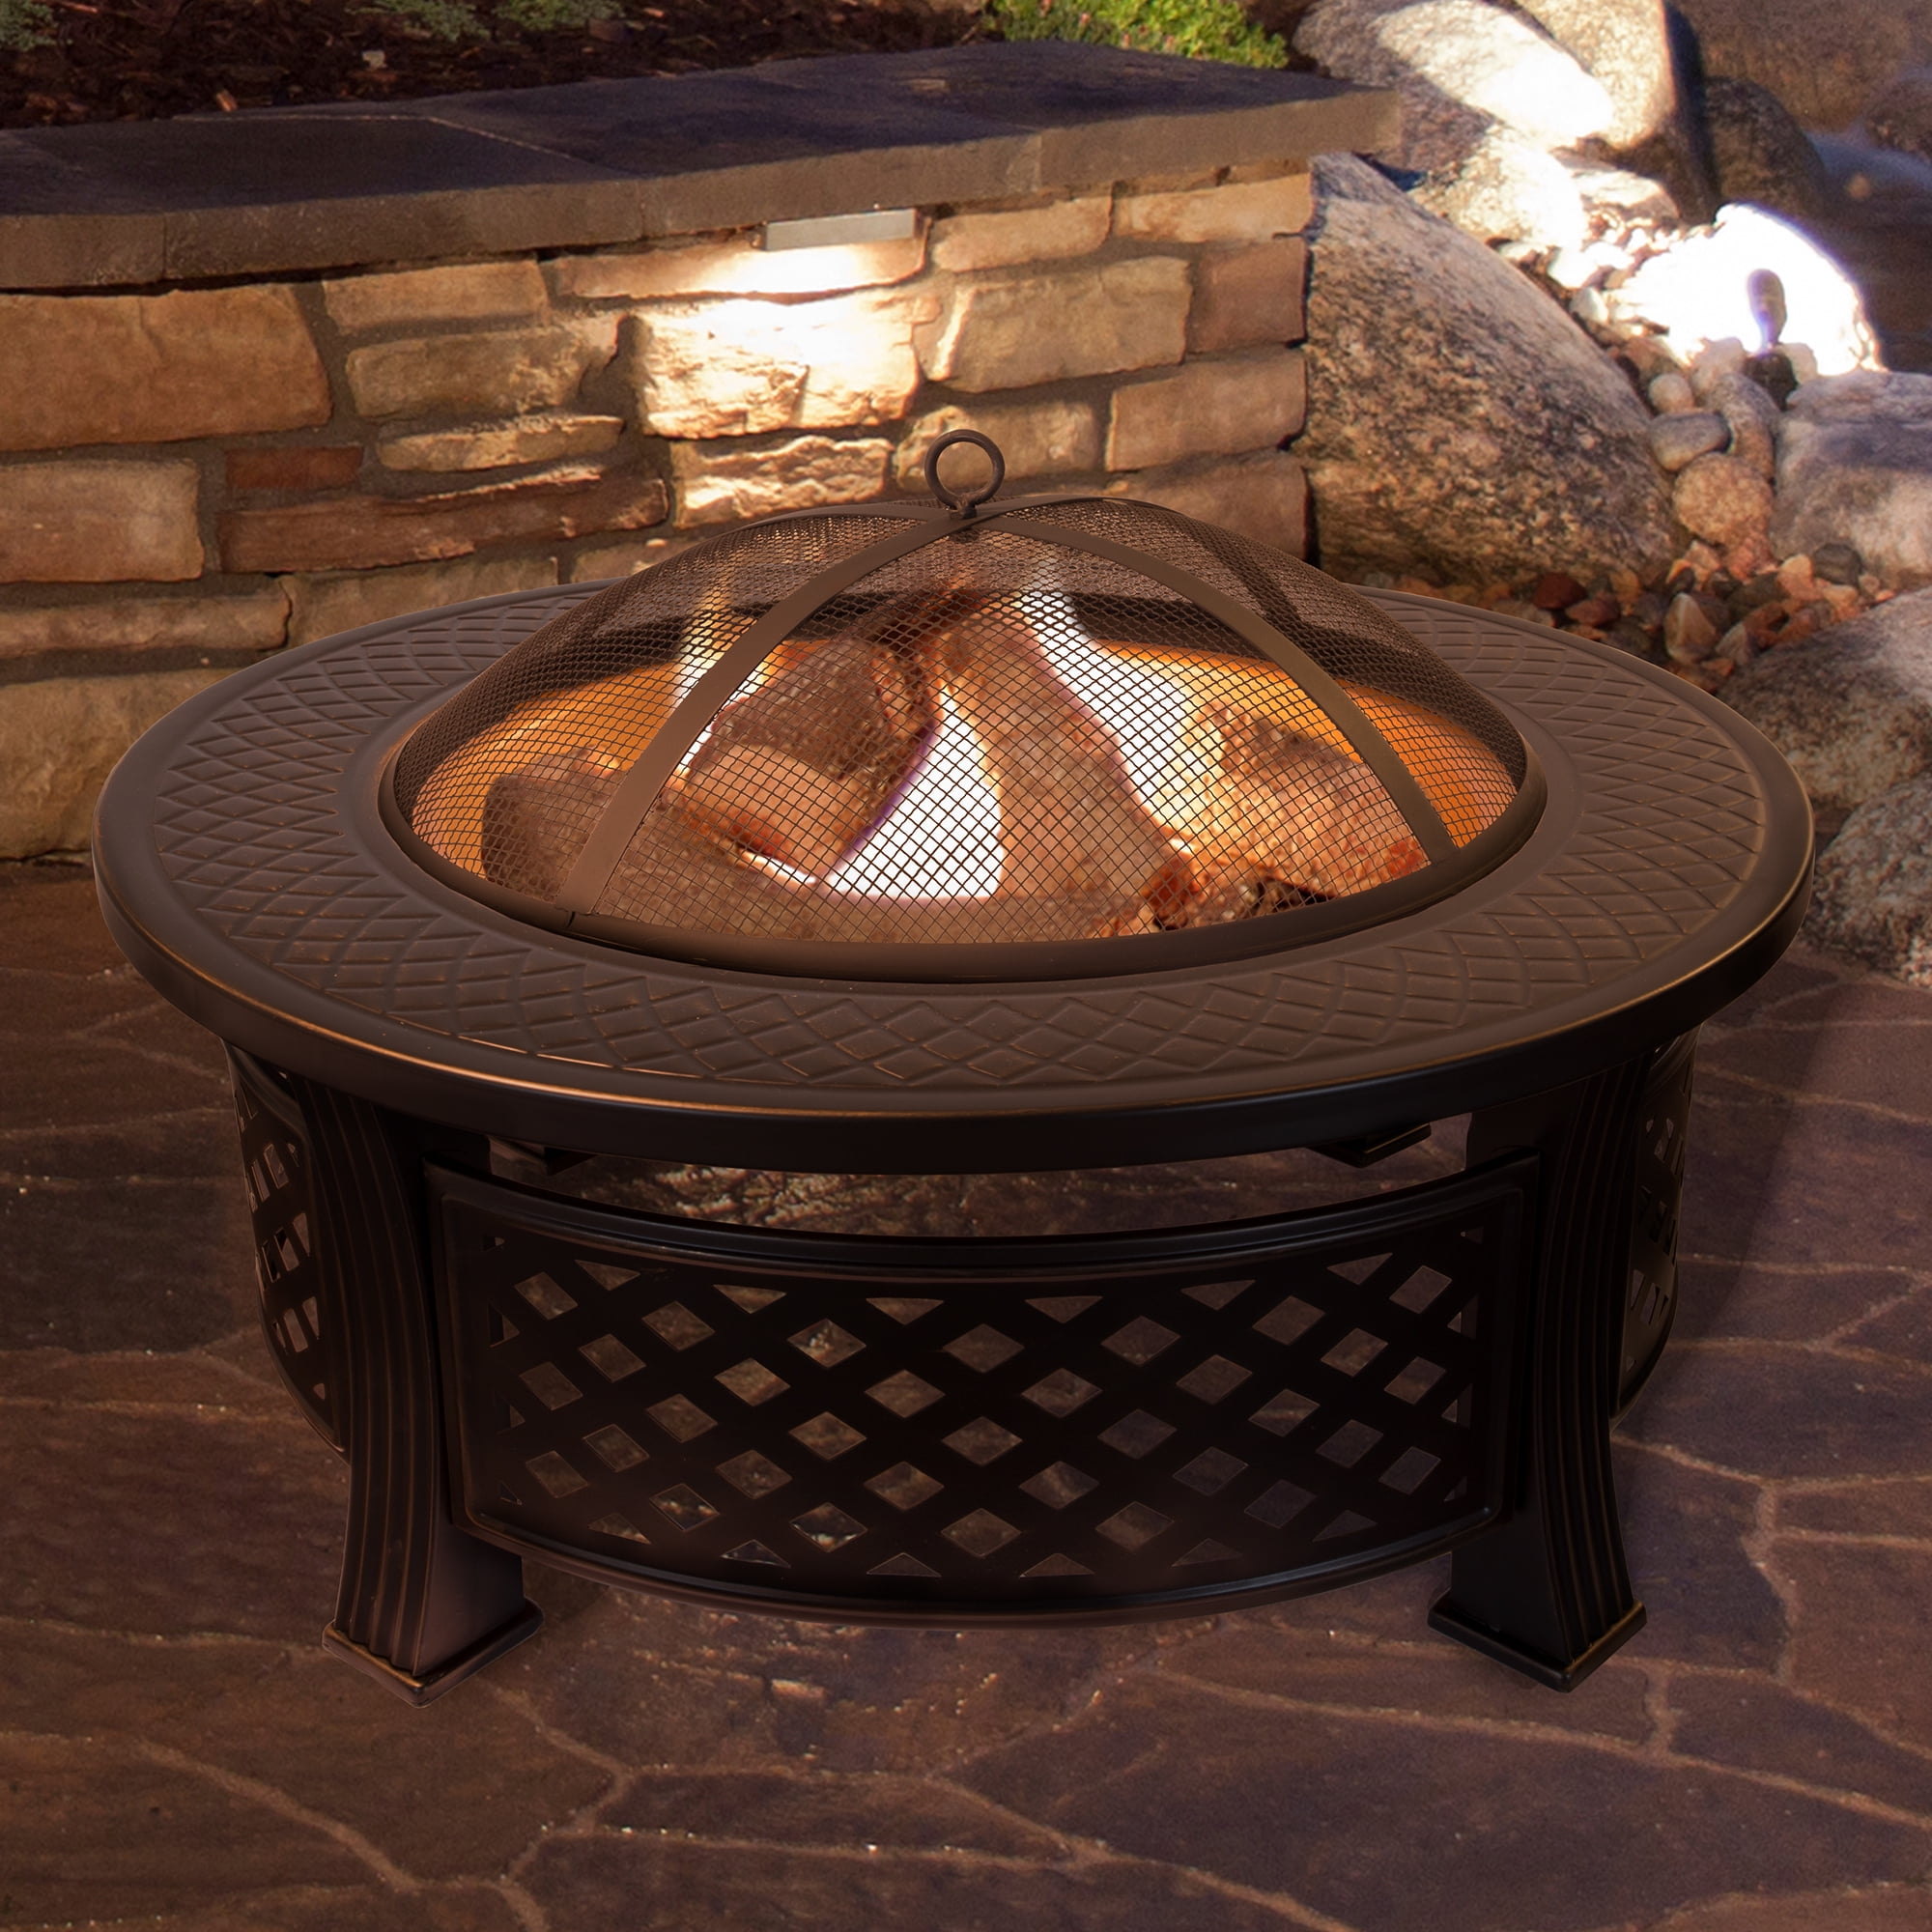 Fire Pit Set, Wood Burning Pit - Includes Spark Screen and ...